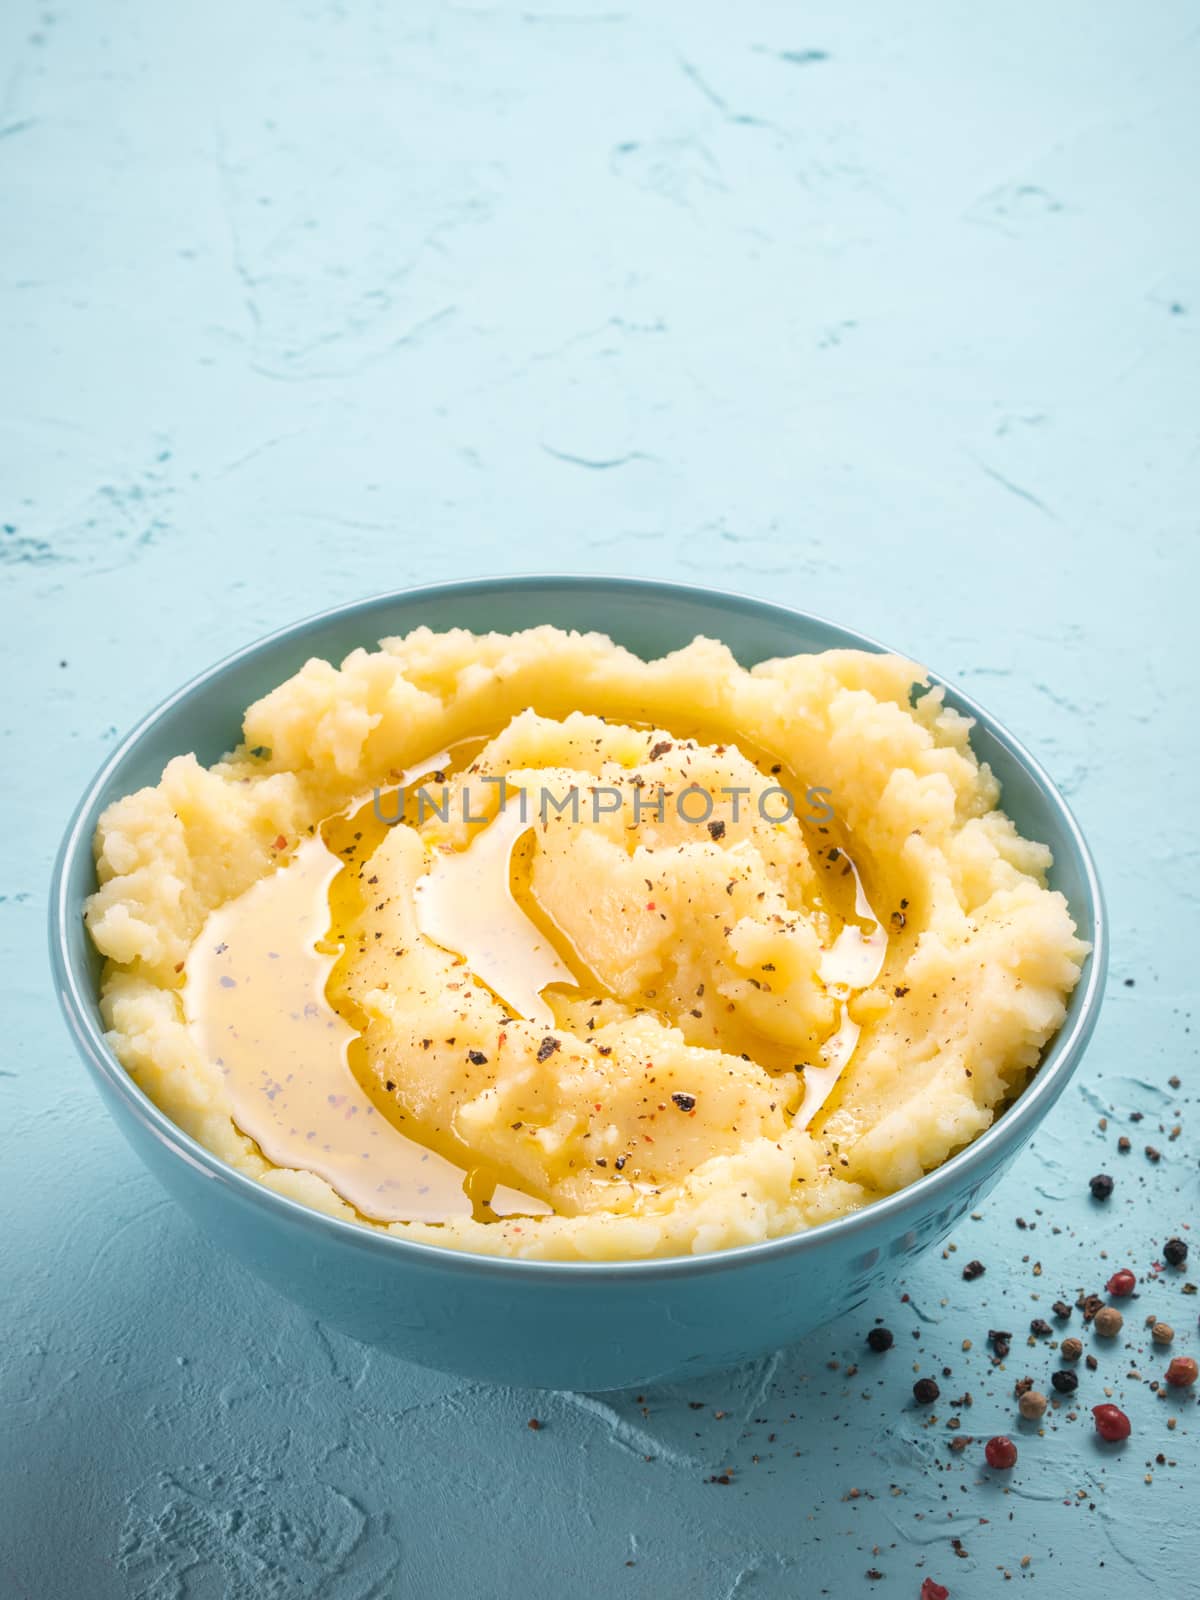 Mashed potatoes on blue concrete background by fascinadora